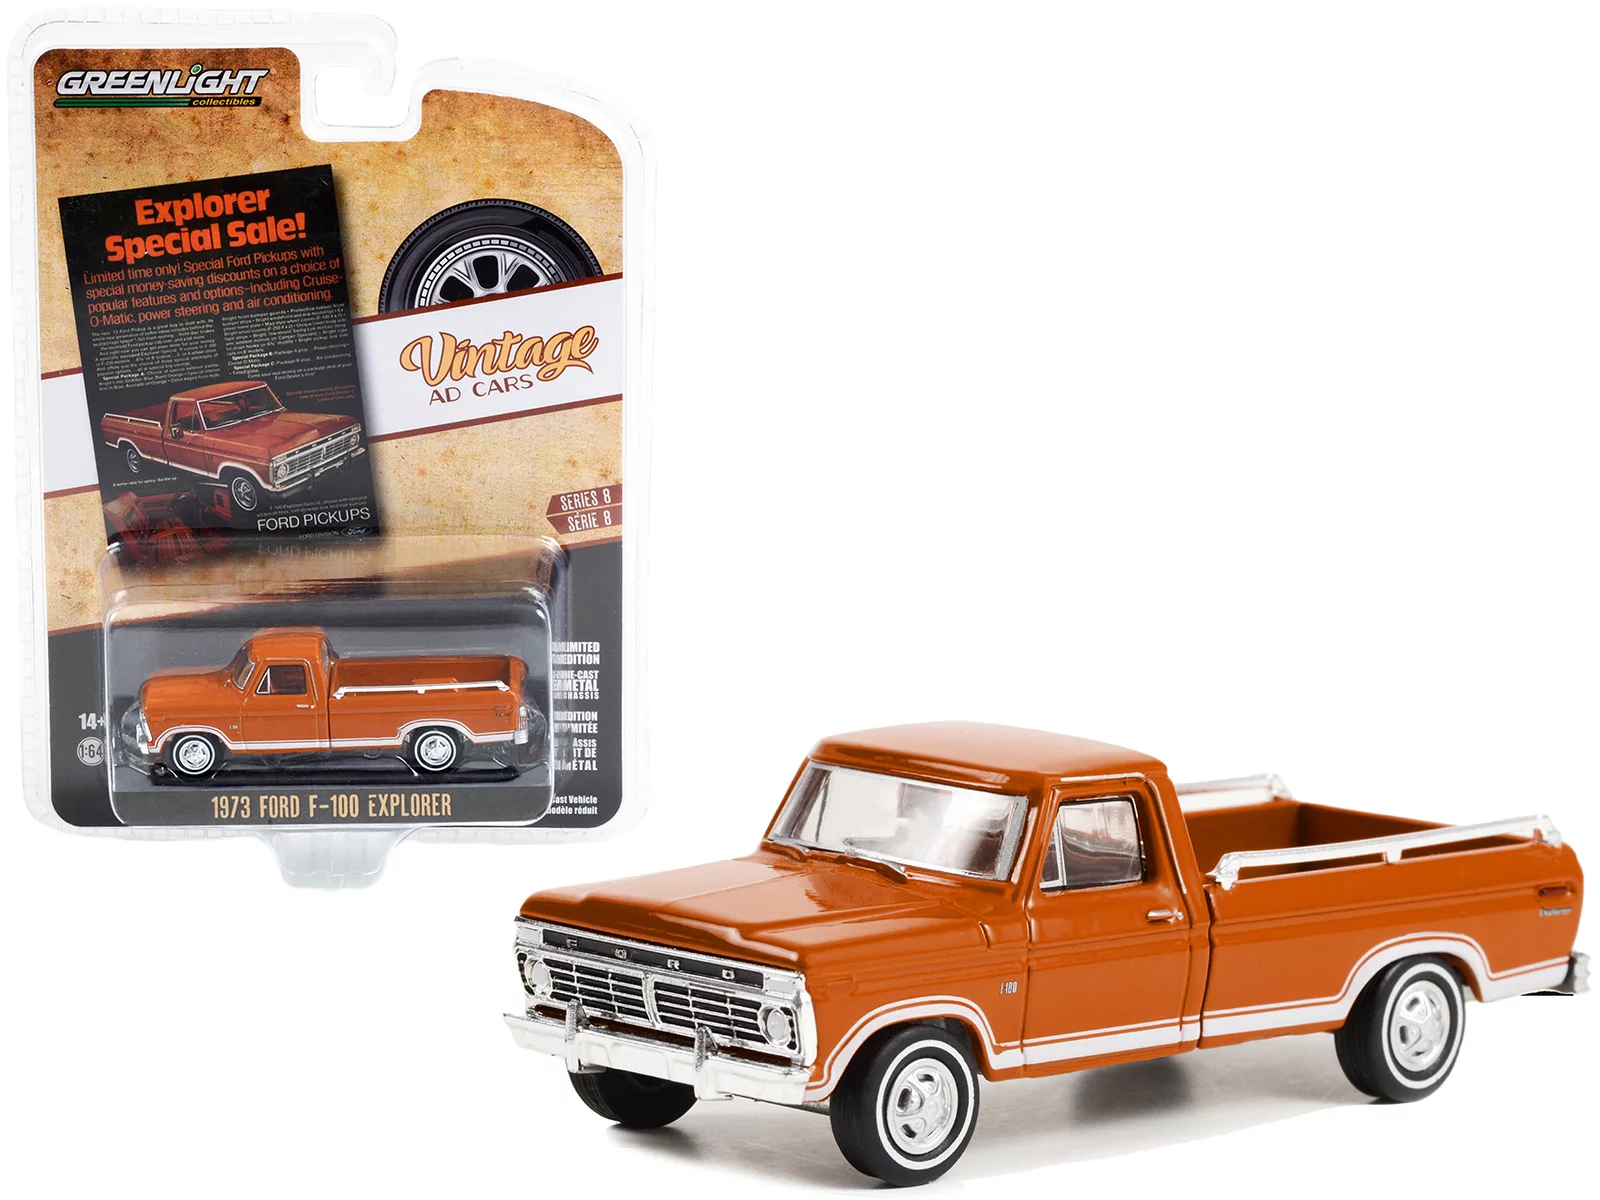 GREENLIGHT HITCHTOW  1992 Ford F-1501992 Ford Bronco on Flatbed Trailer  グリーンライト  ミニカー